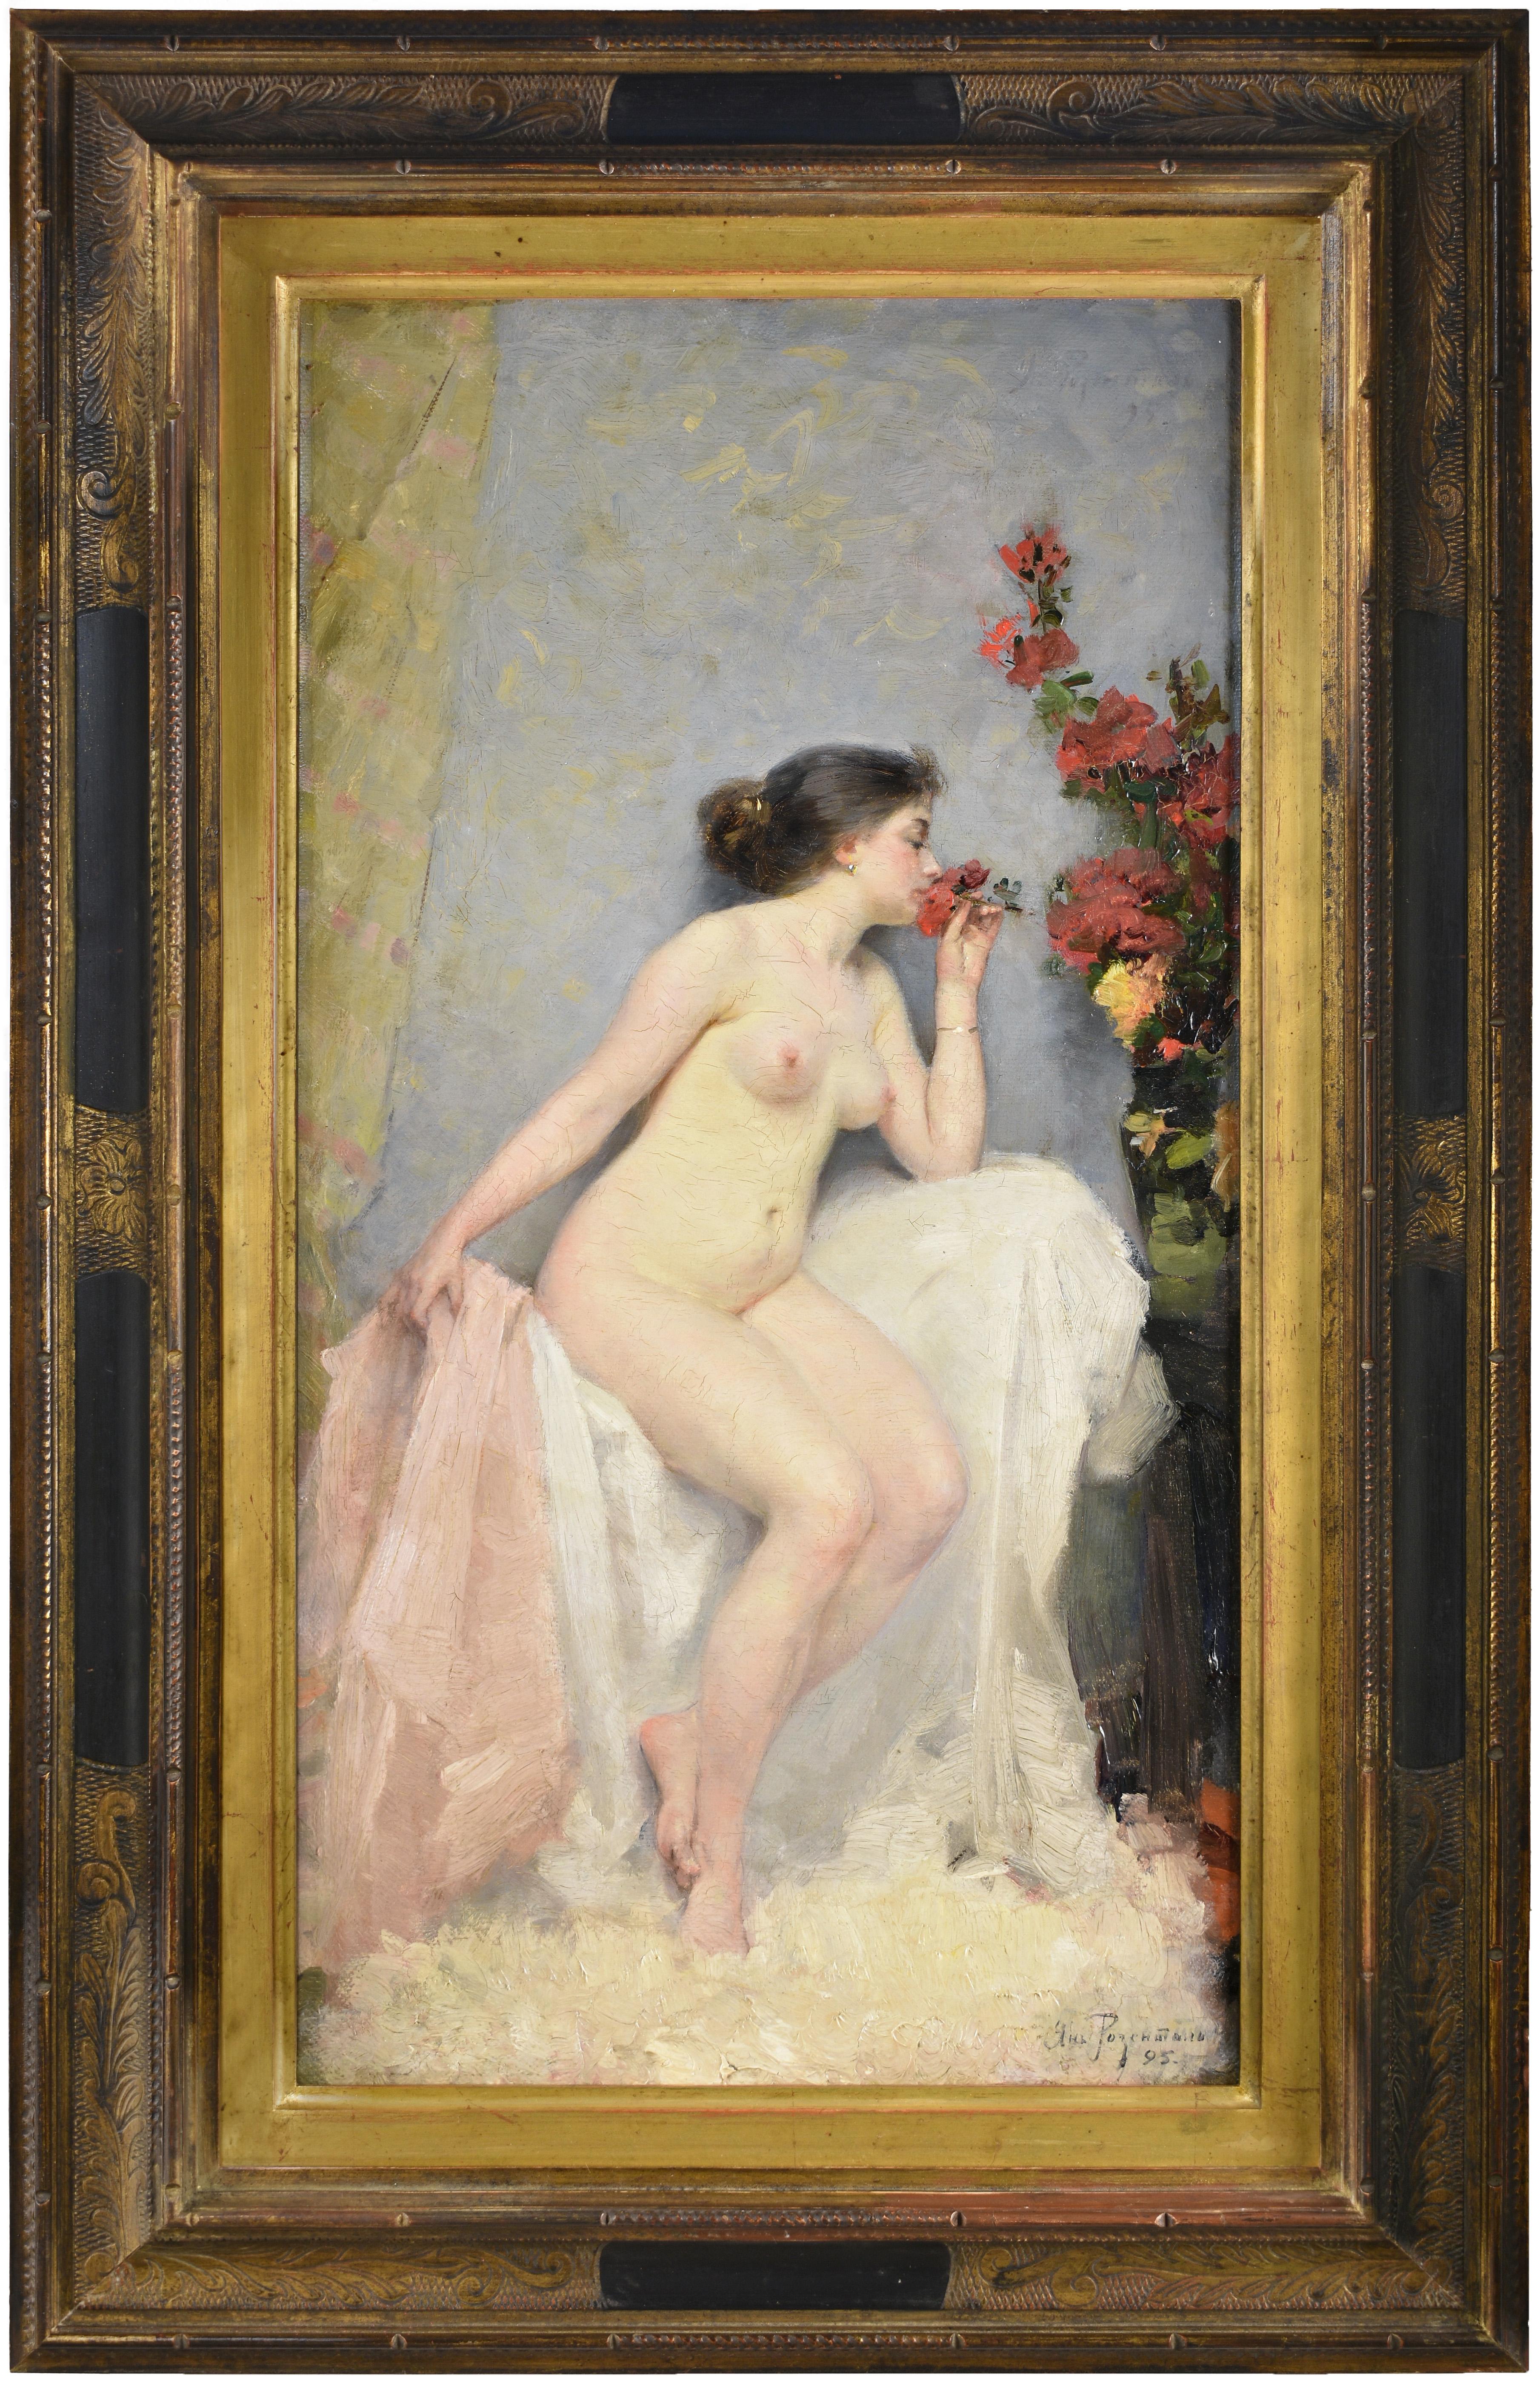 Nude woman with roses by famous Latvian painter Janis Rozentāls